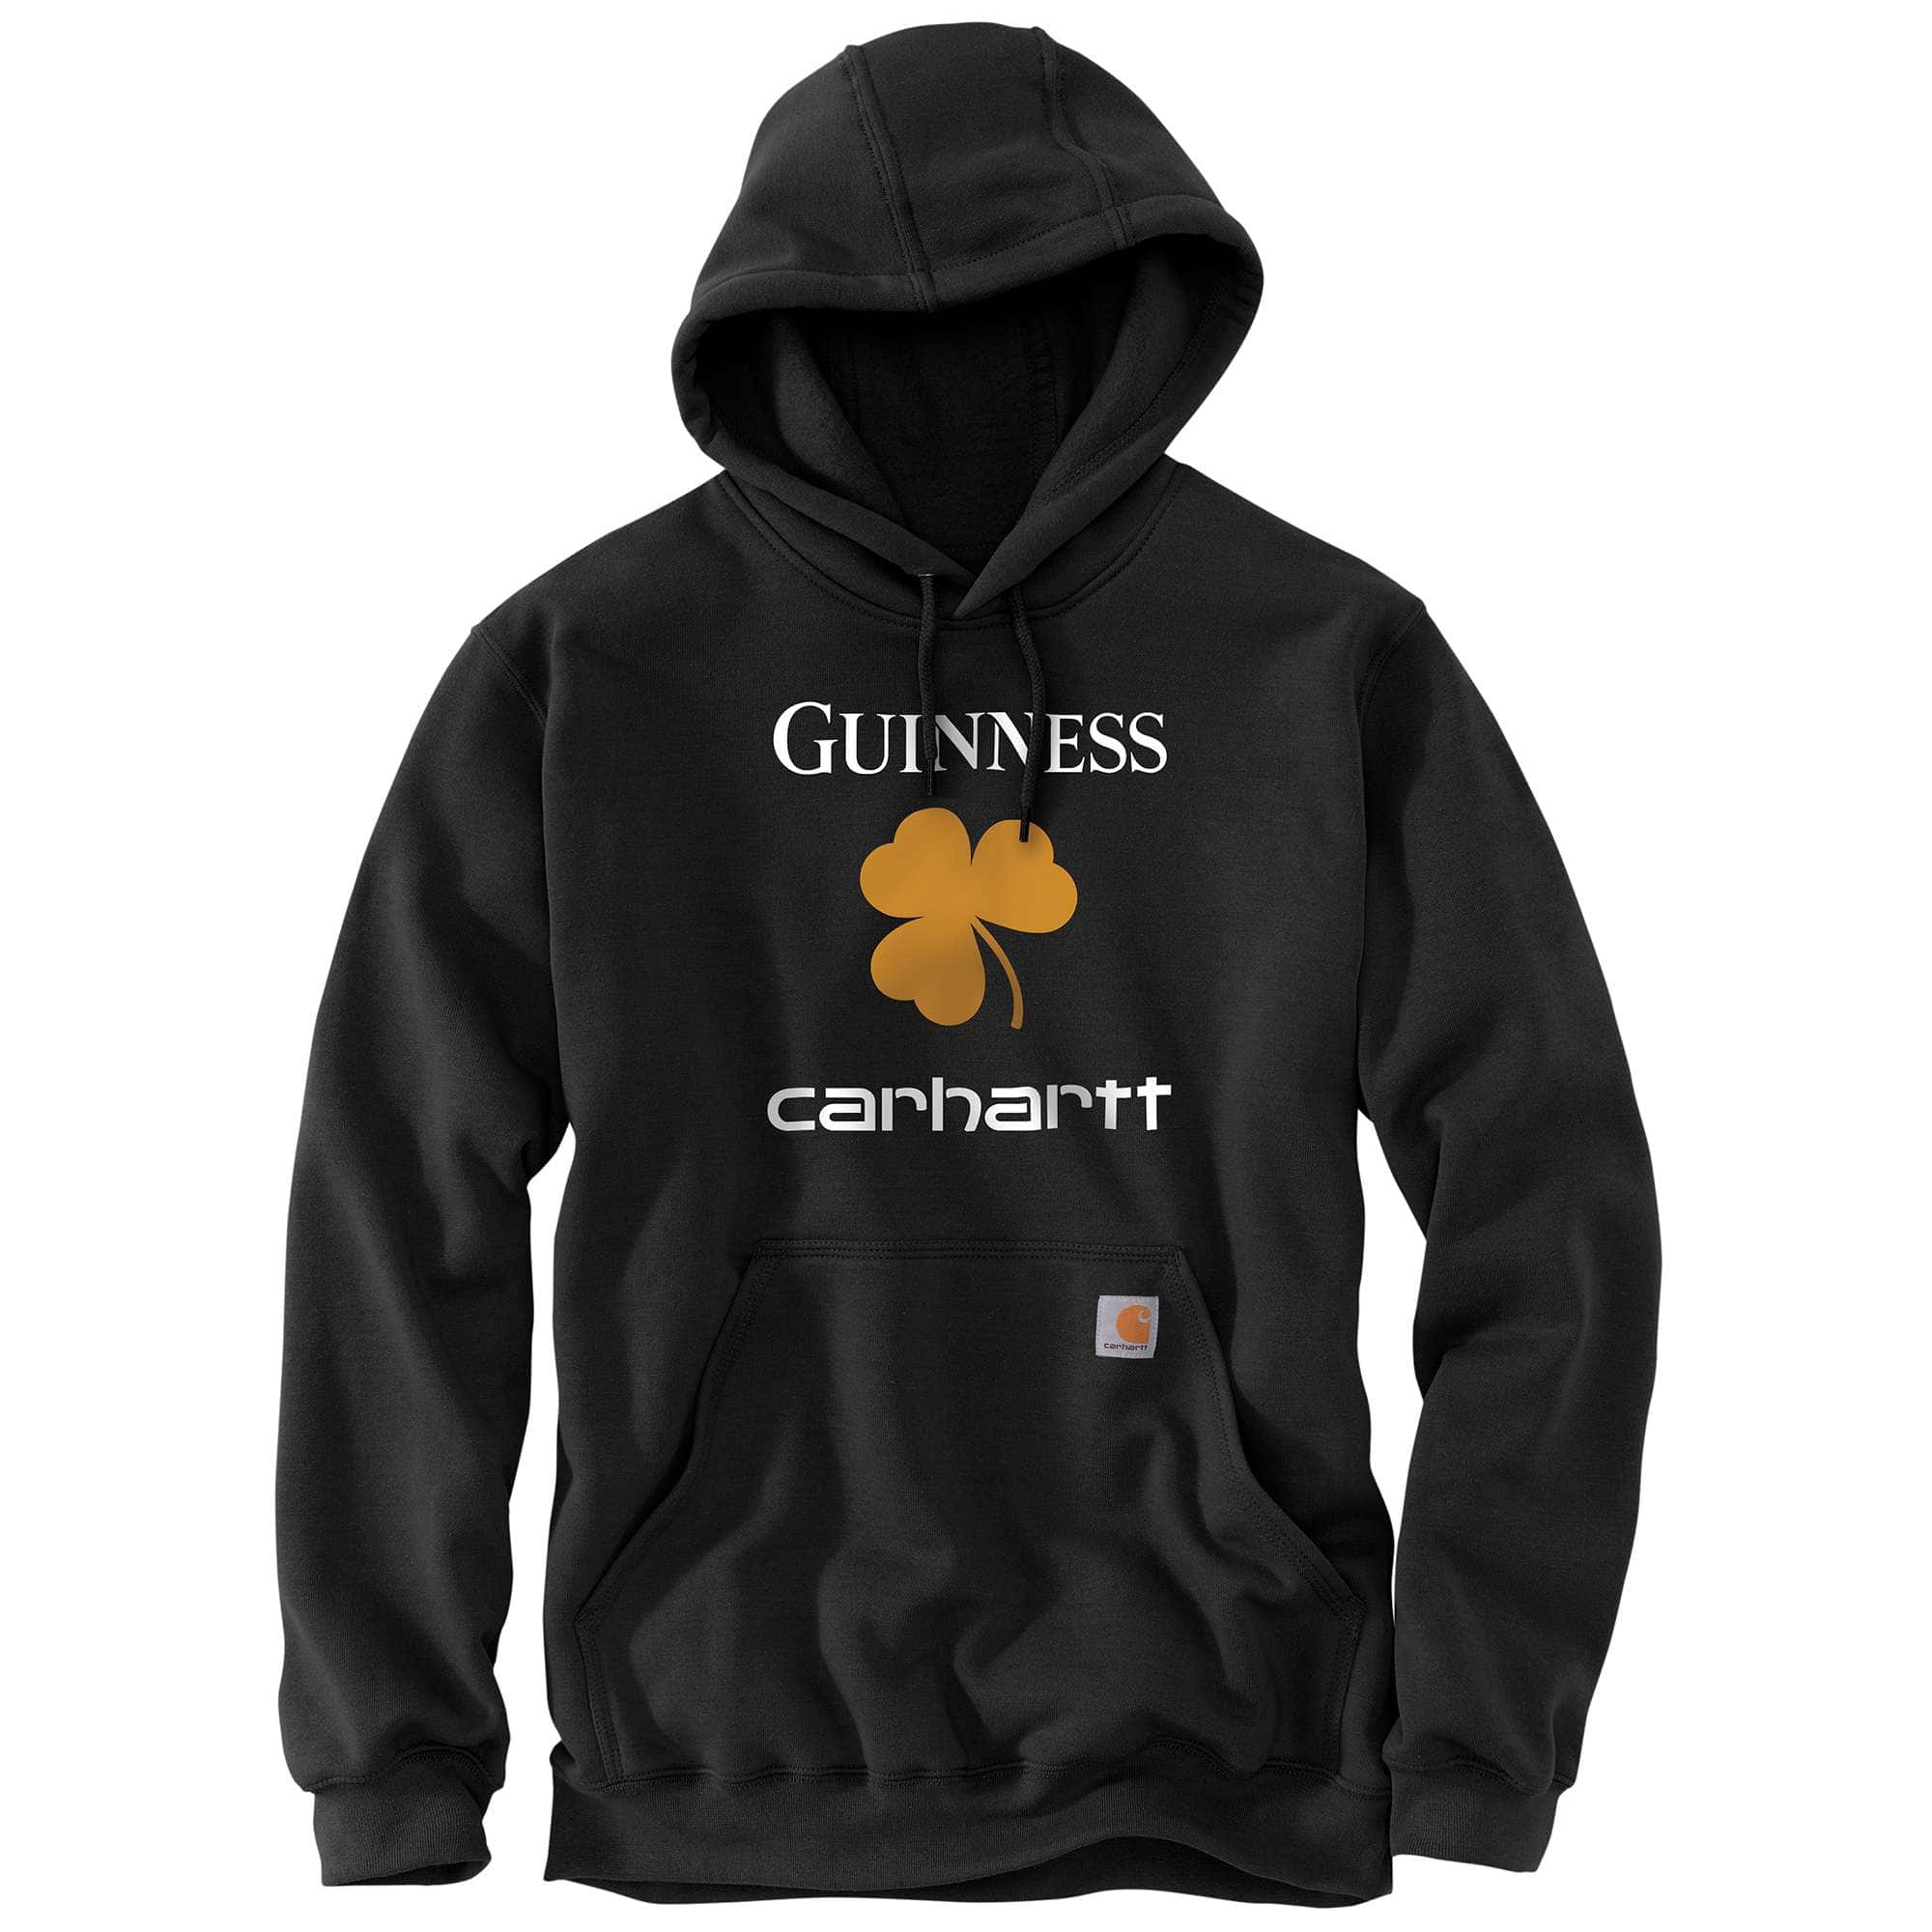 LOOSE FIT MIDWEIGHT GUINNESS GRAPHIC SWEATSHIRT